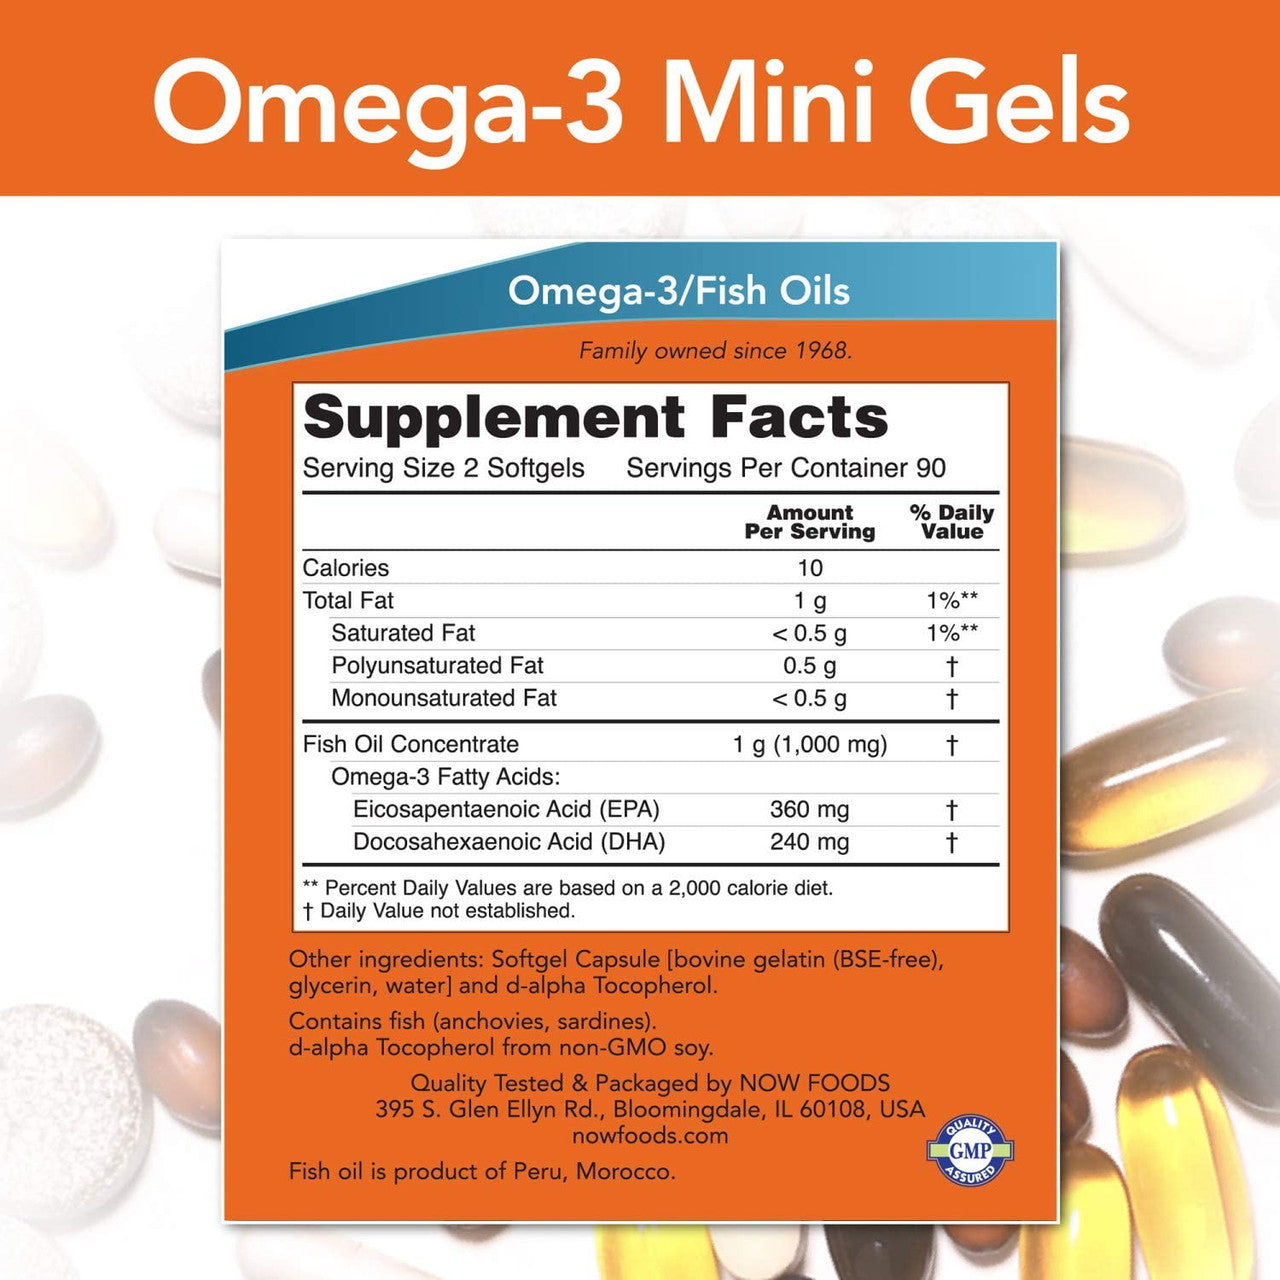 Now Omega-3 Mini Gels supplement facts